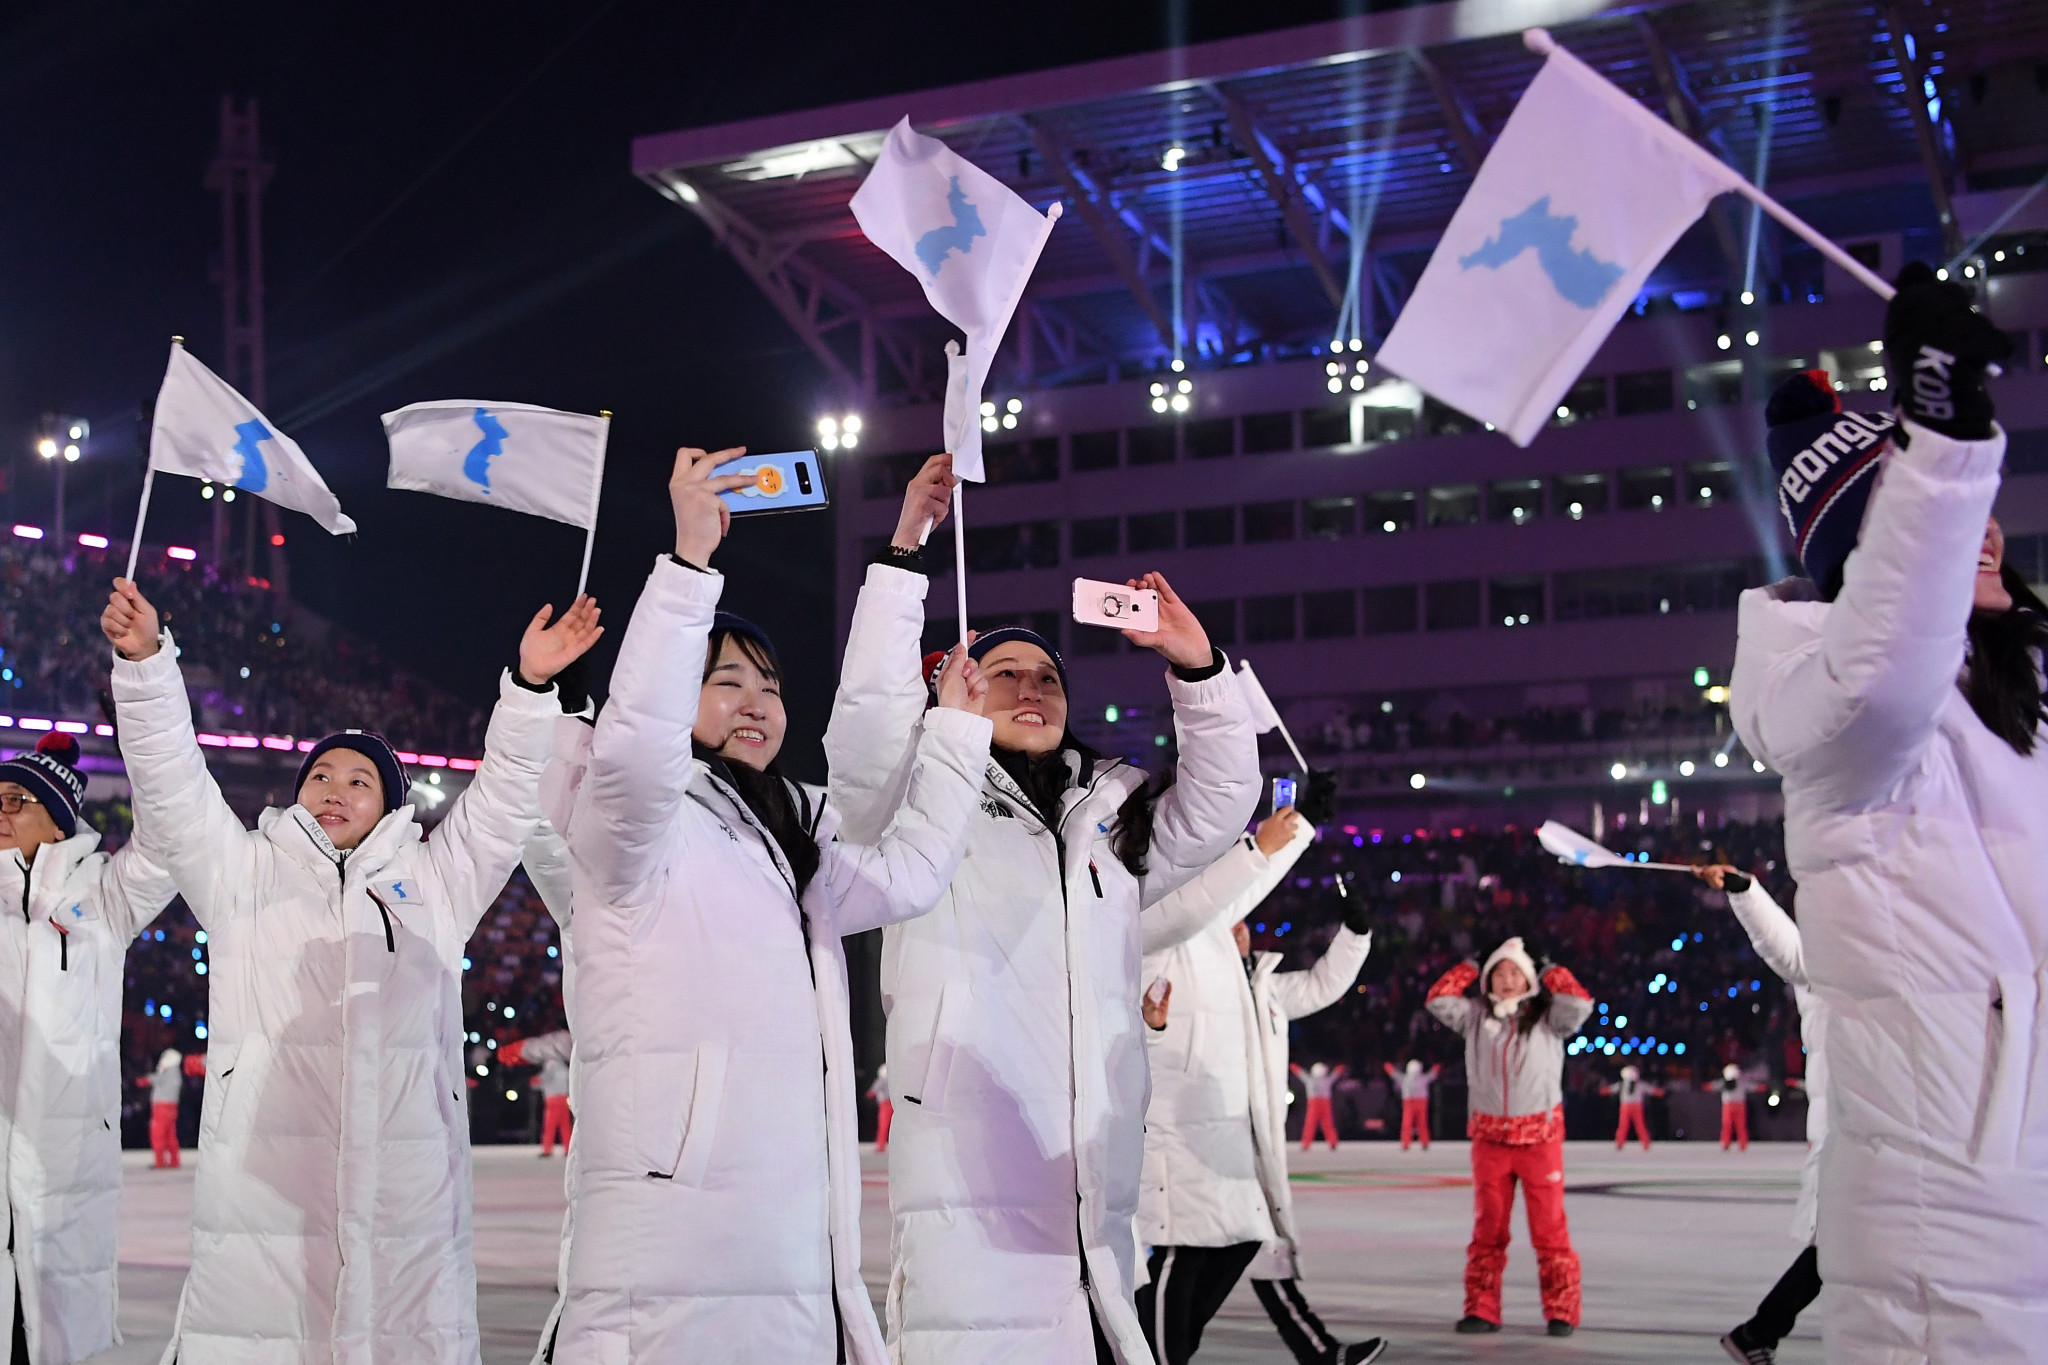 The North and South Korean teams entered the Pyeongchang 2018 Opening Ceremony under a unified flag, but relations between the two countries have since deteriorated ©Getty Images